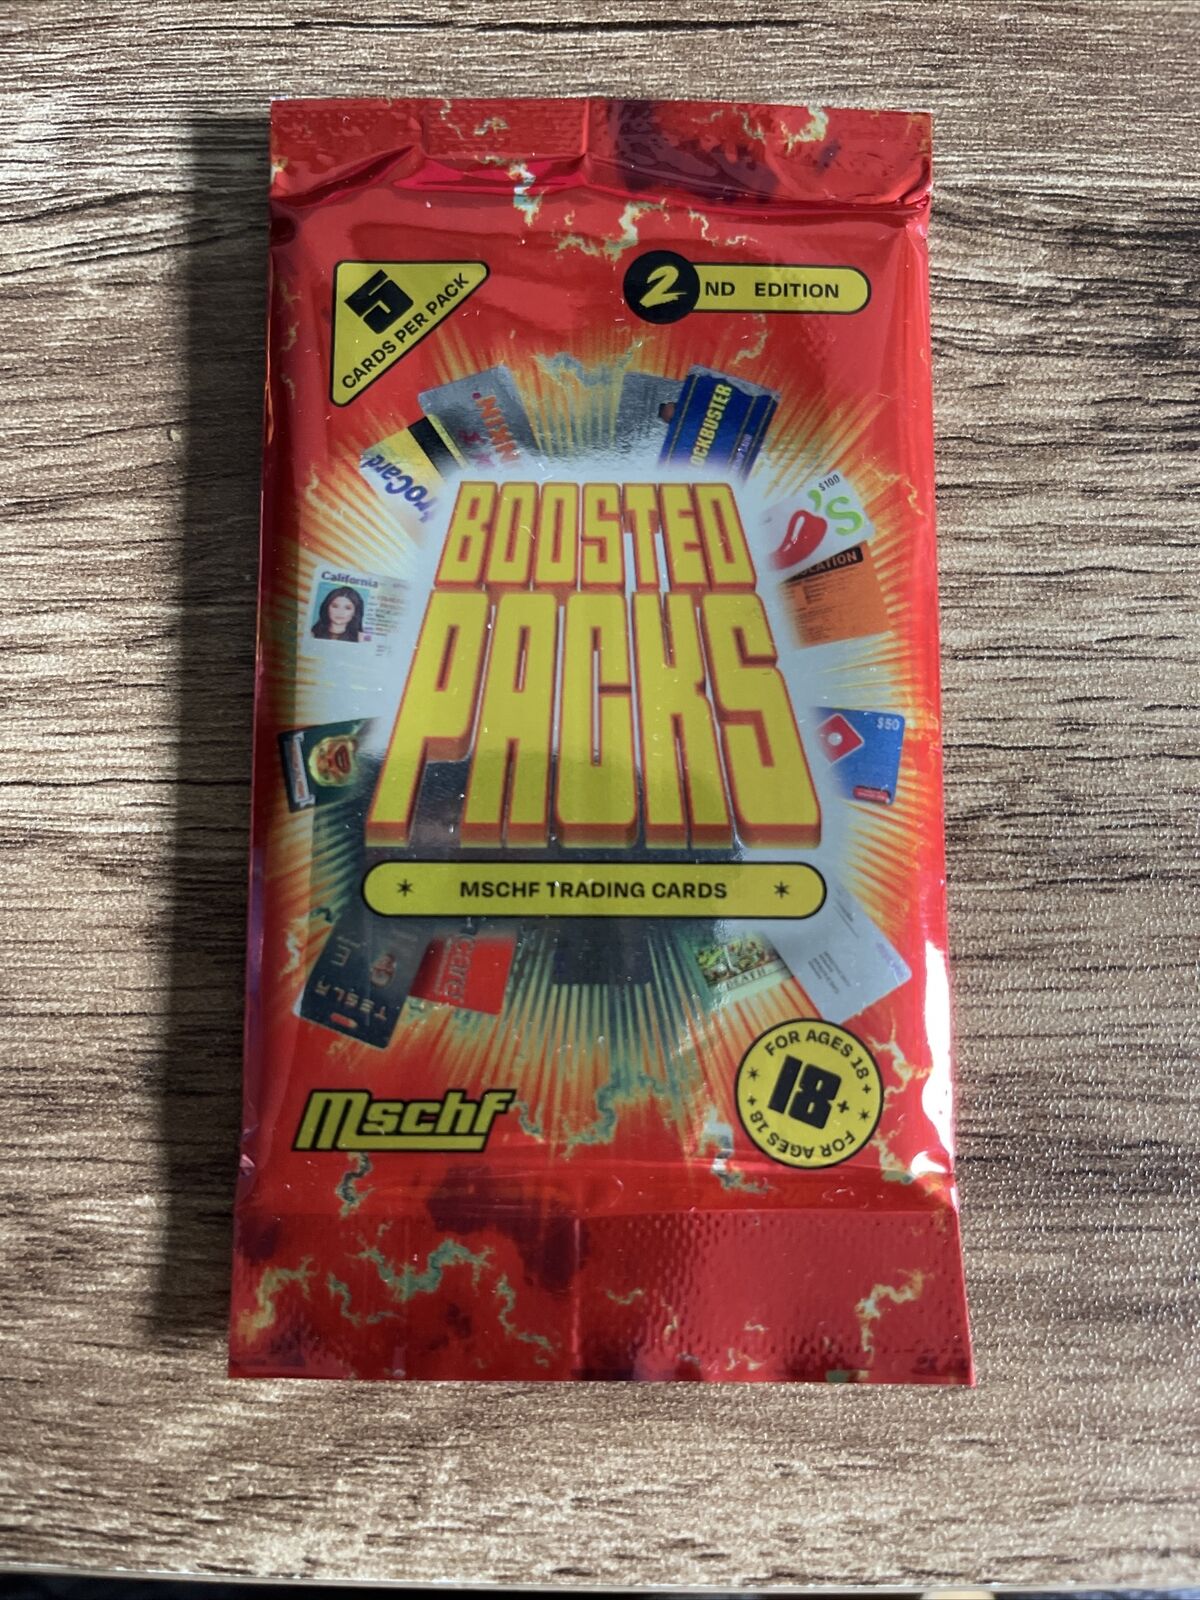 MSCHF Boosted Pack 2nd Edition- V2 SINGLE Pack - New And Unopened - IN HAND